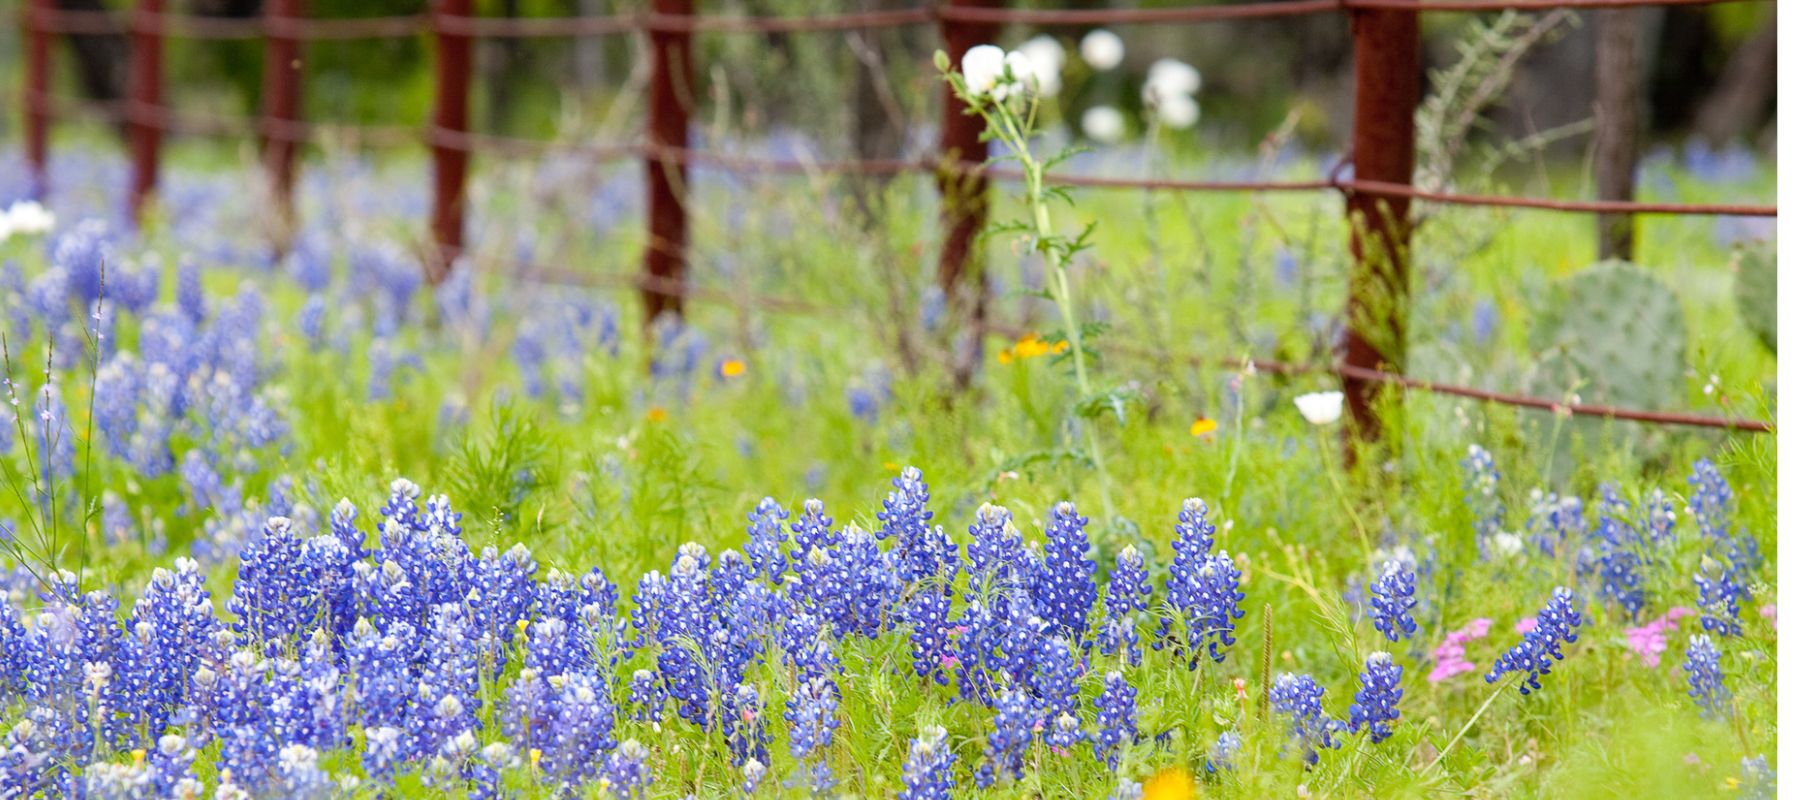 closeup shot of bluebonnets during the springtime in texas